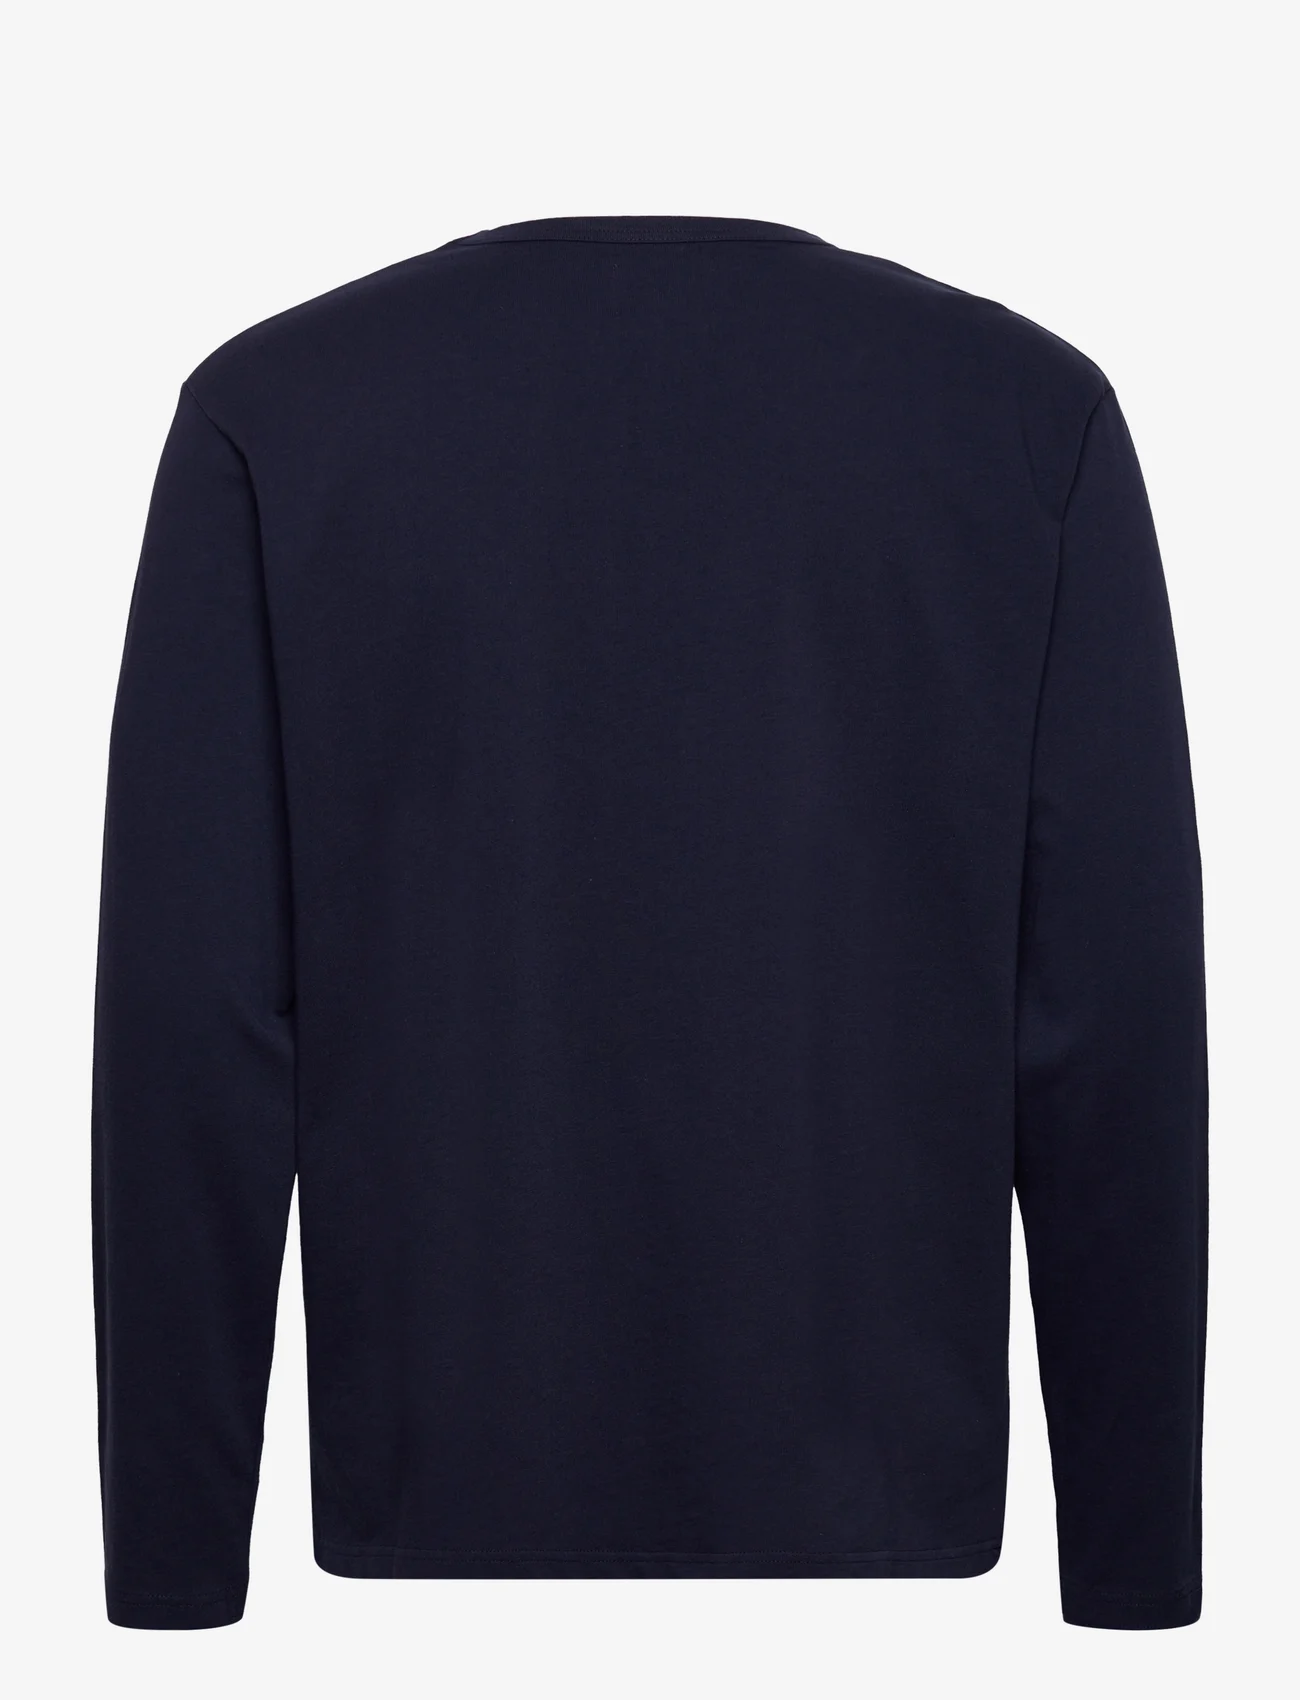 Double A by Wood Wood - Mel long sleeve - langærmede t-shirts - navy - 1